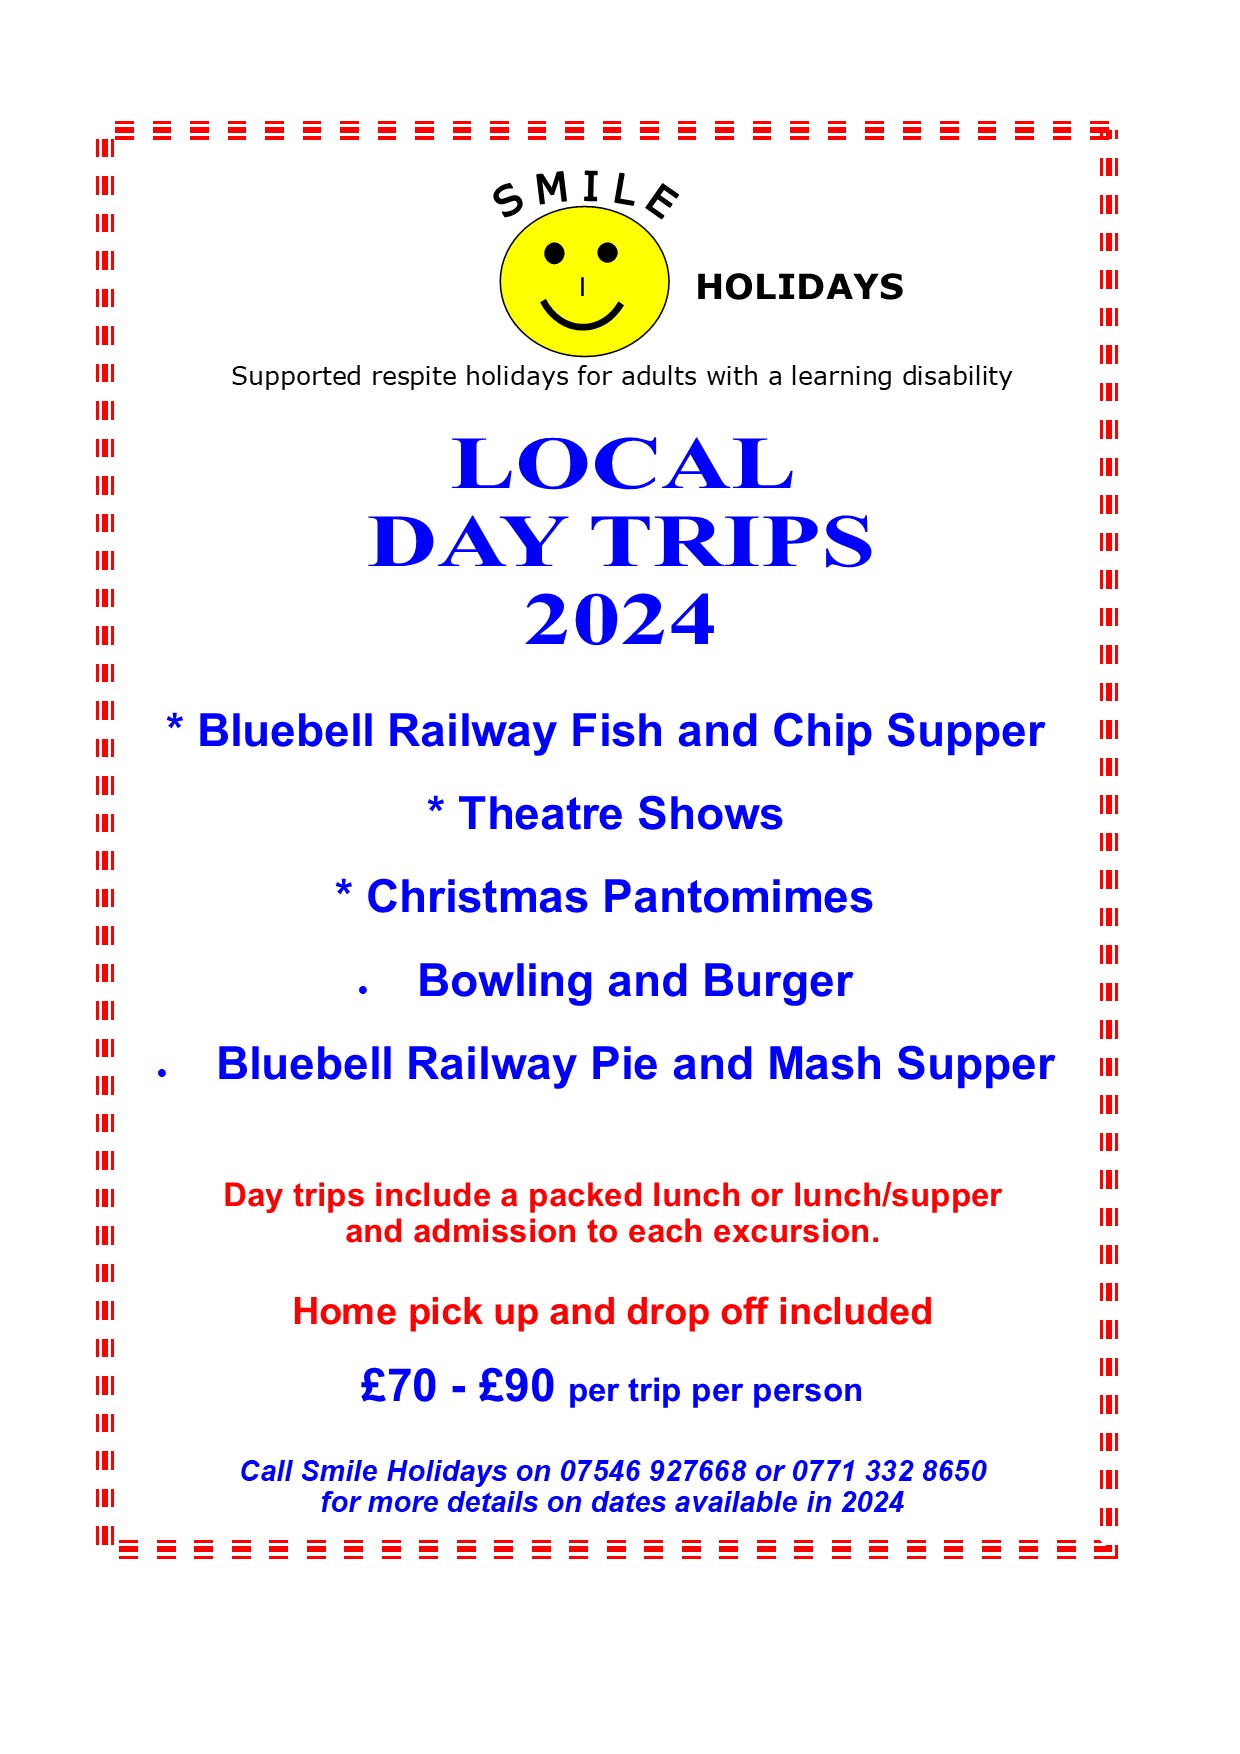 Local Day Trips from Brighton  from Smile Holidays 2024